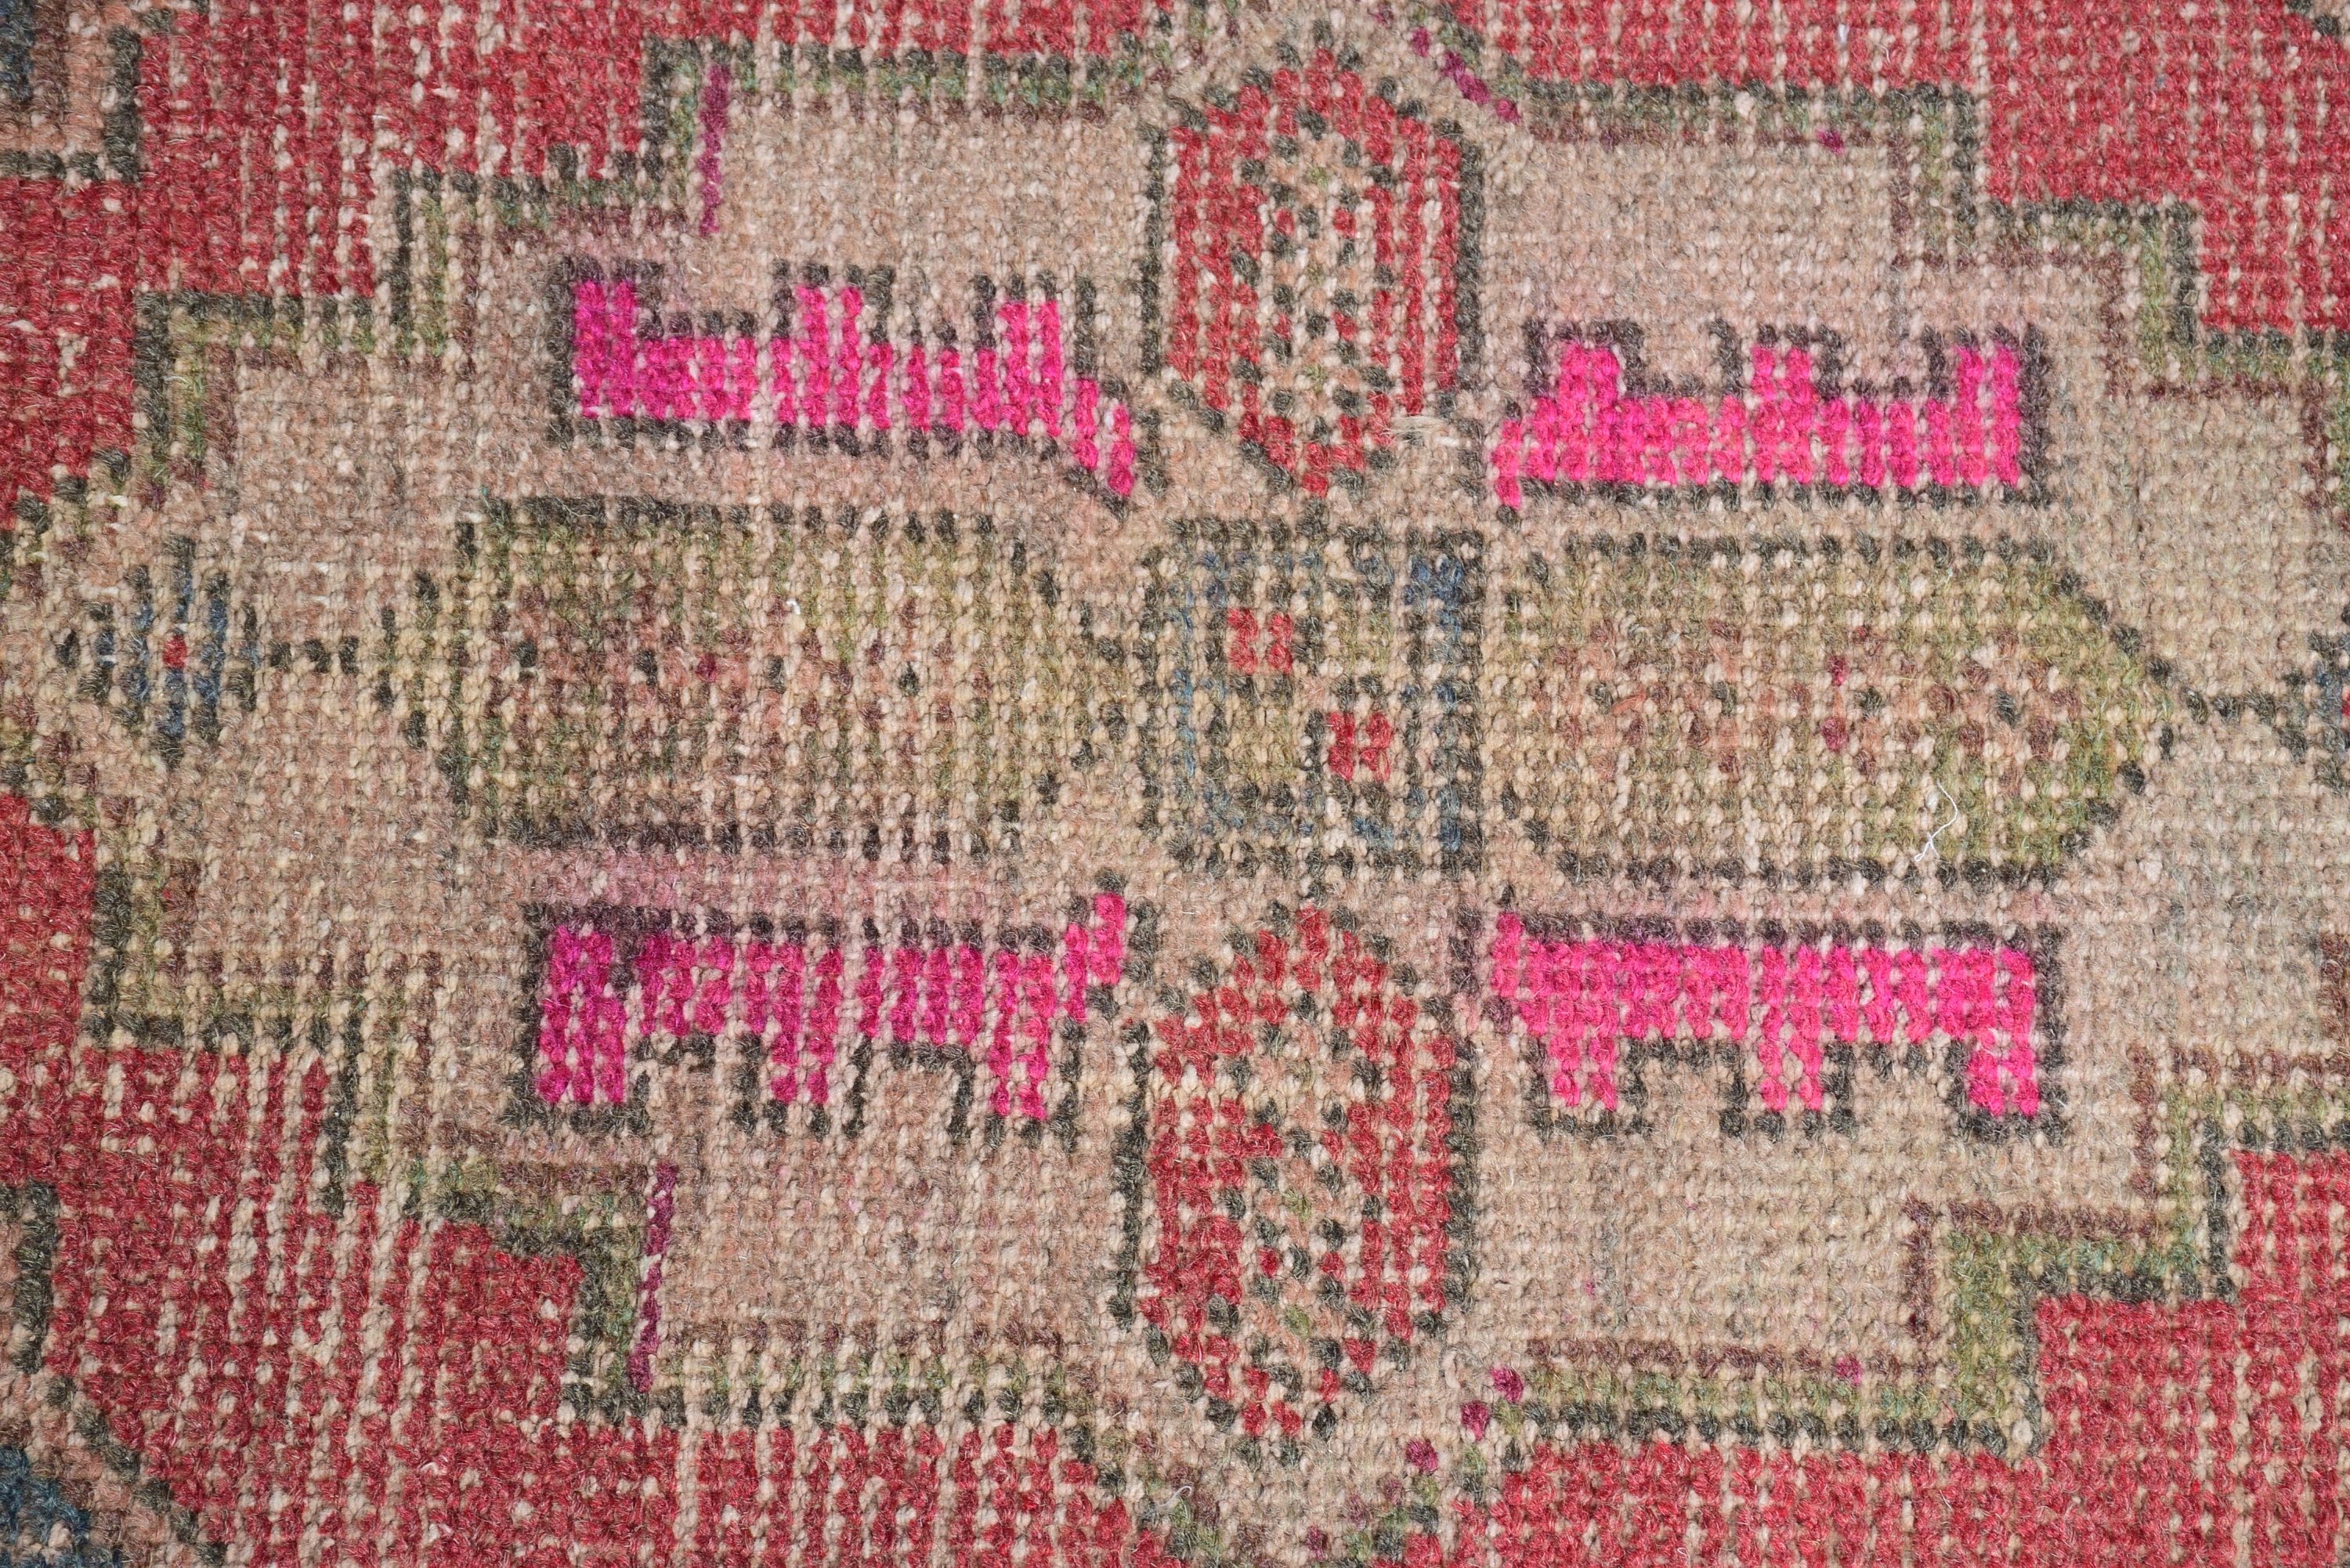 Antique Rug, Kitchen Rugs, Entry Rugs, 1.4x2.8 ft Small Rugs, Oushak Rug, Vintage Rug, Office Rug, Red Cool Rug, Turkish Rug, Rugs for Bath